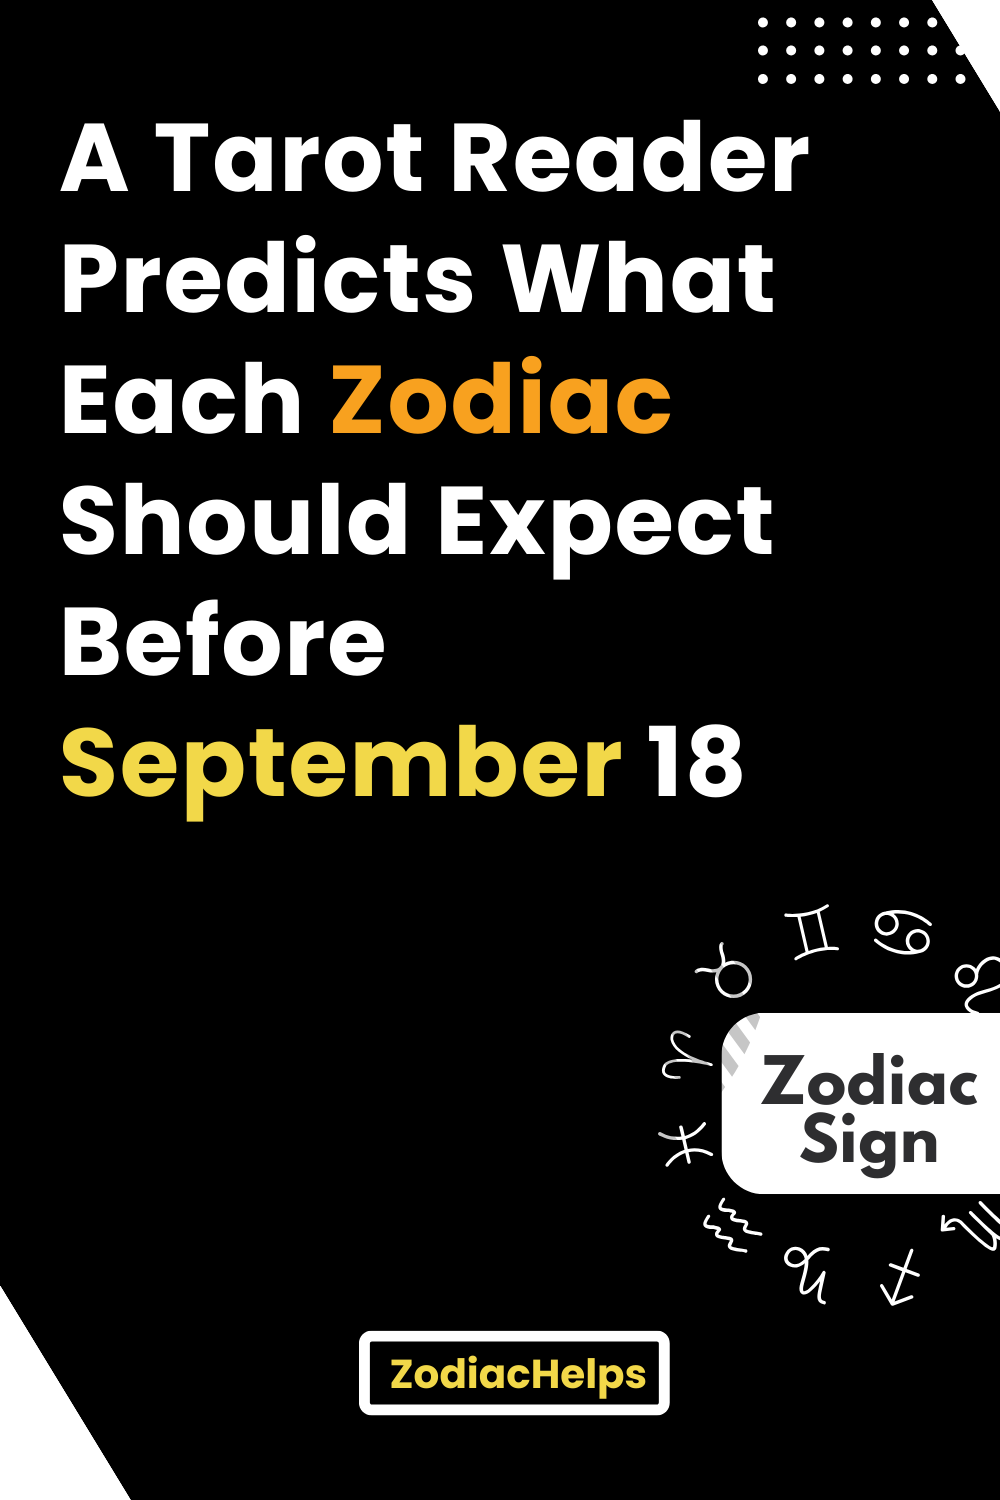 A Tarot Reader Predicts What Each Zodiac Should Expect Before September 18